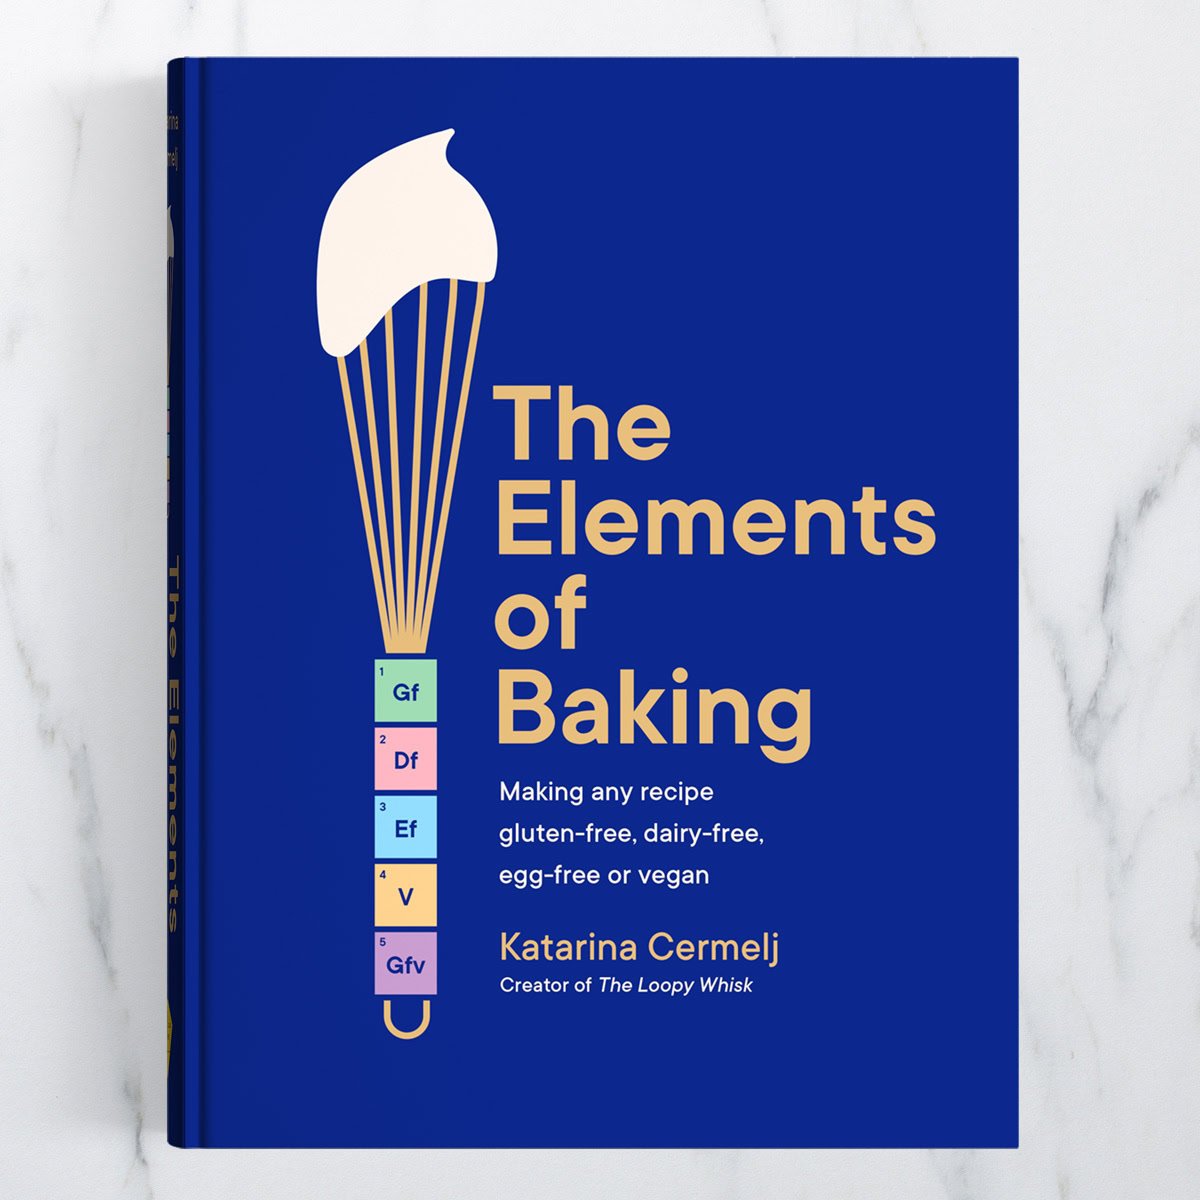 The Elements of Baking cookbook on a white marble background.